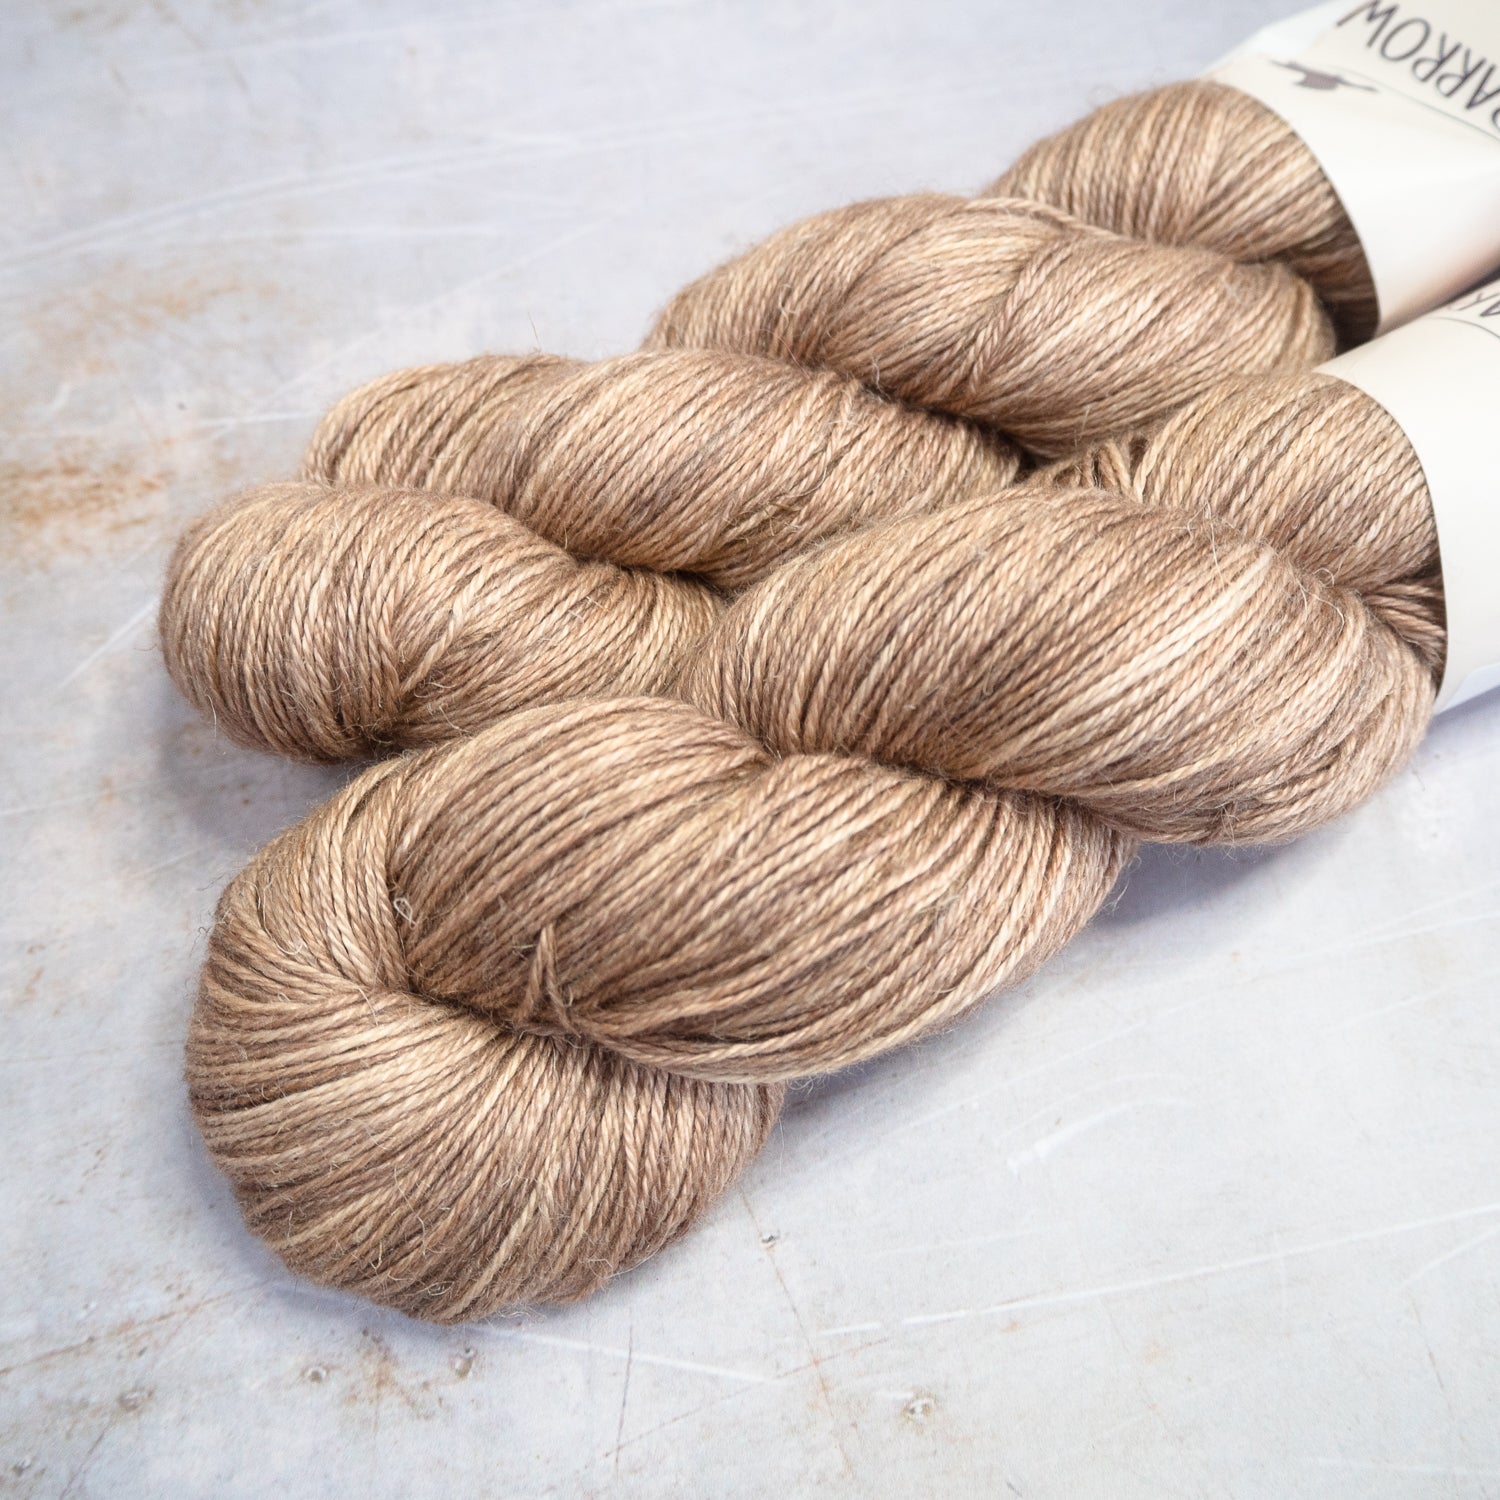 Cocoon 4ply otterly